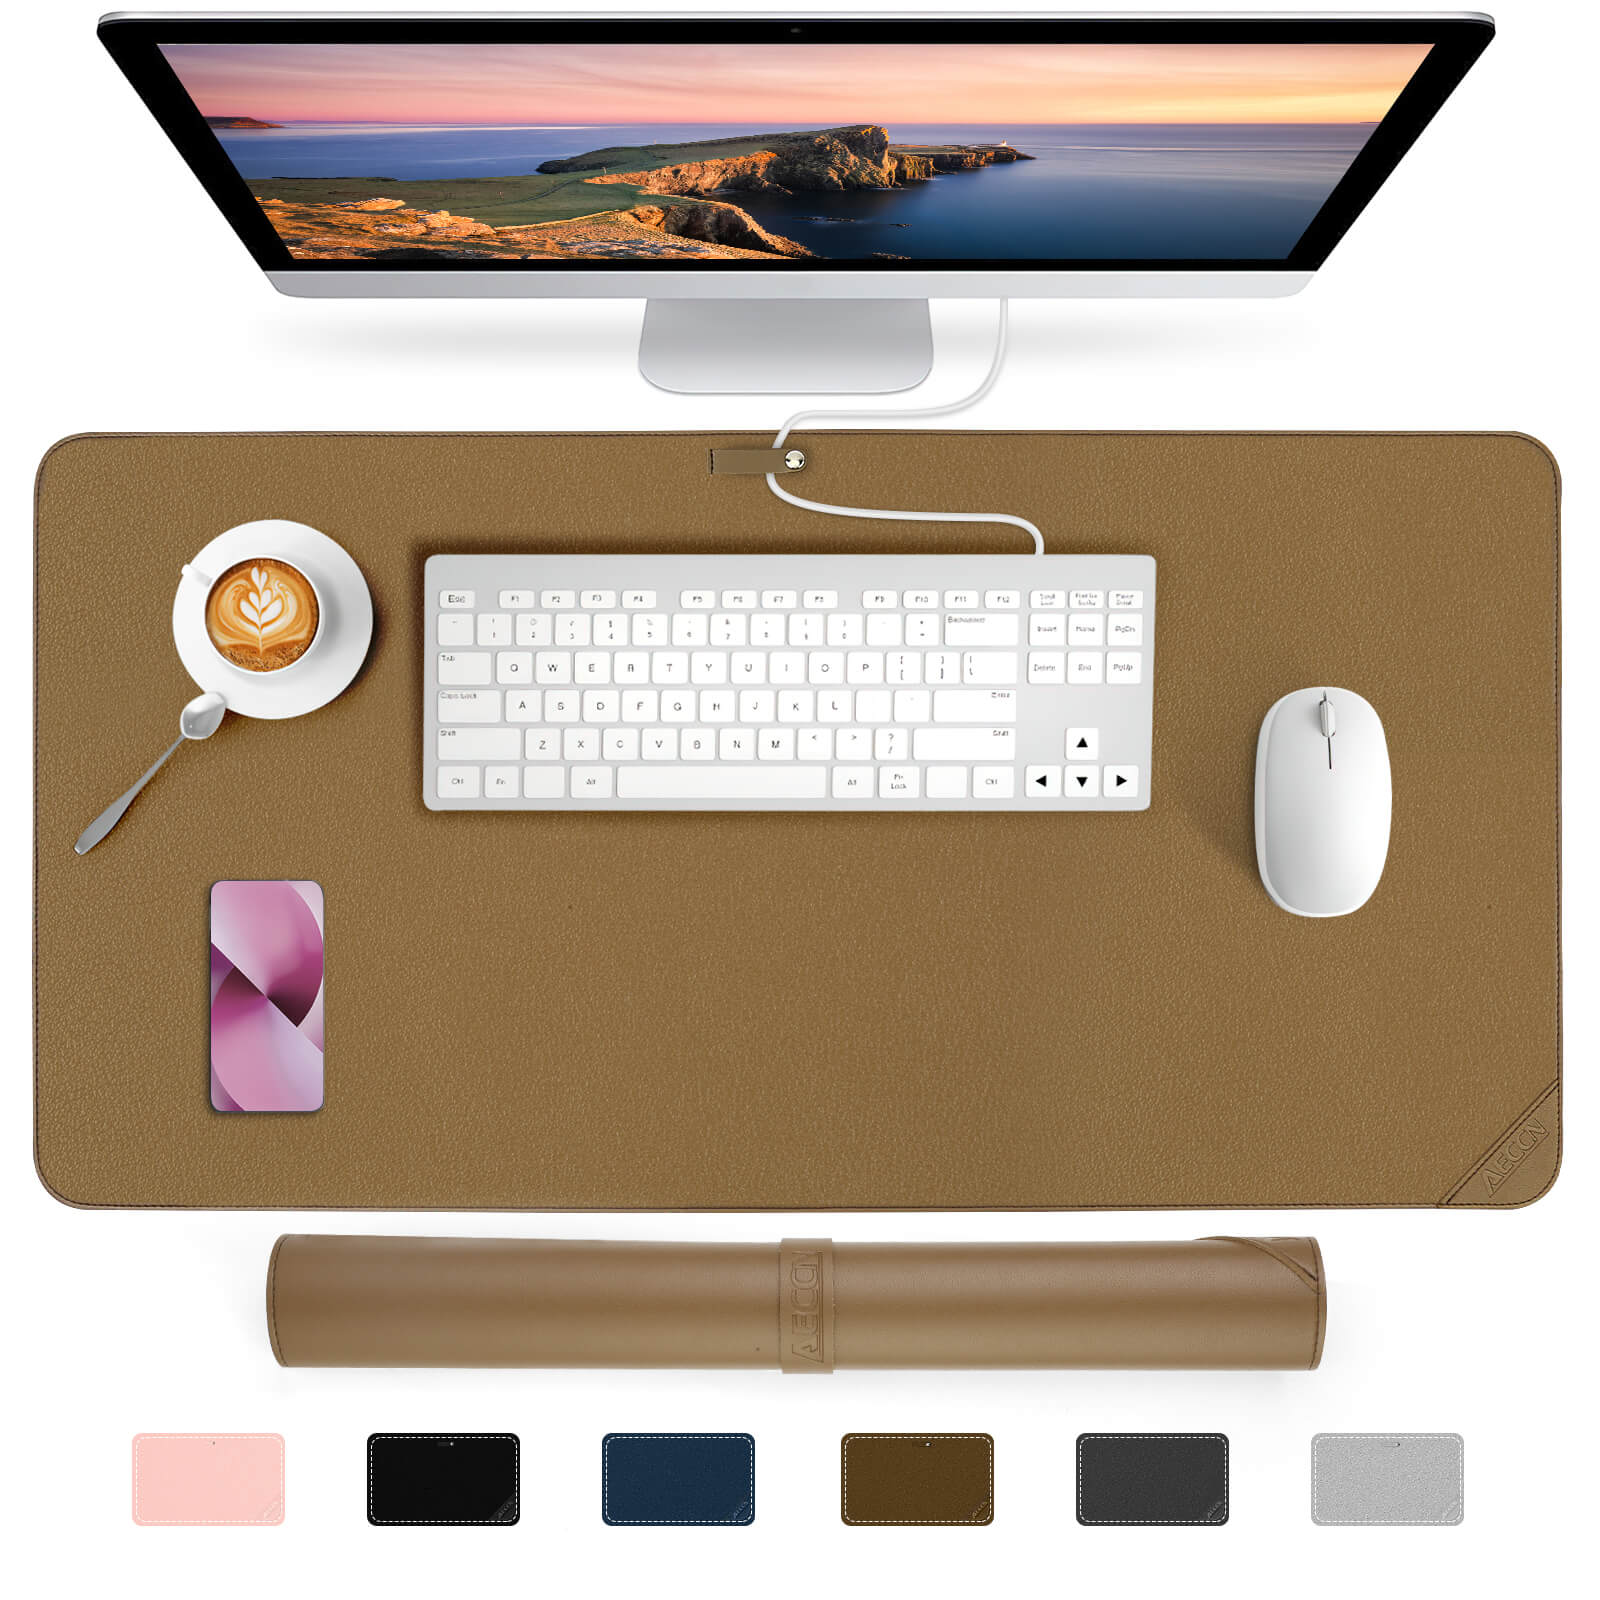  Leather Desk Pad Protector,Mouse Pad,Office Desk Mat, Non-Slip  PU Leather Desk Blotter,Laptop Desk Pad,Waterproof Desk Writing Pad for  Office and Home (Black,31.5 x 15.7) : Office Products